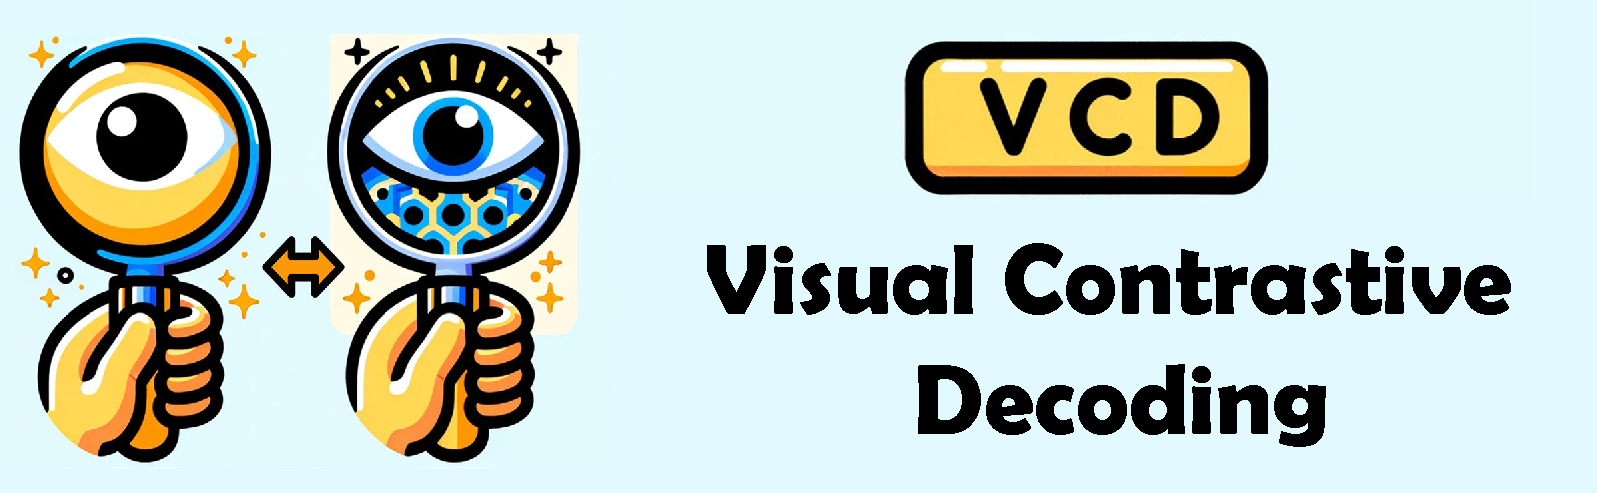 VCD_logo_title.png